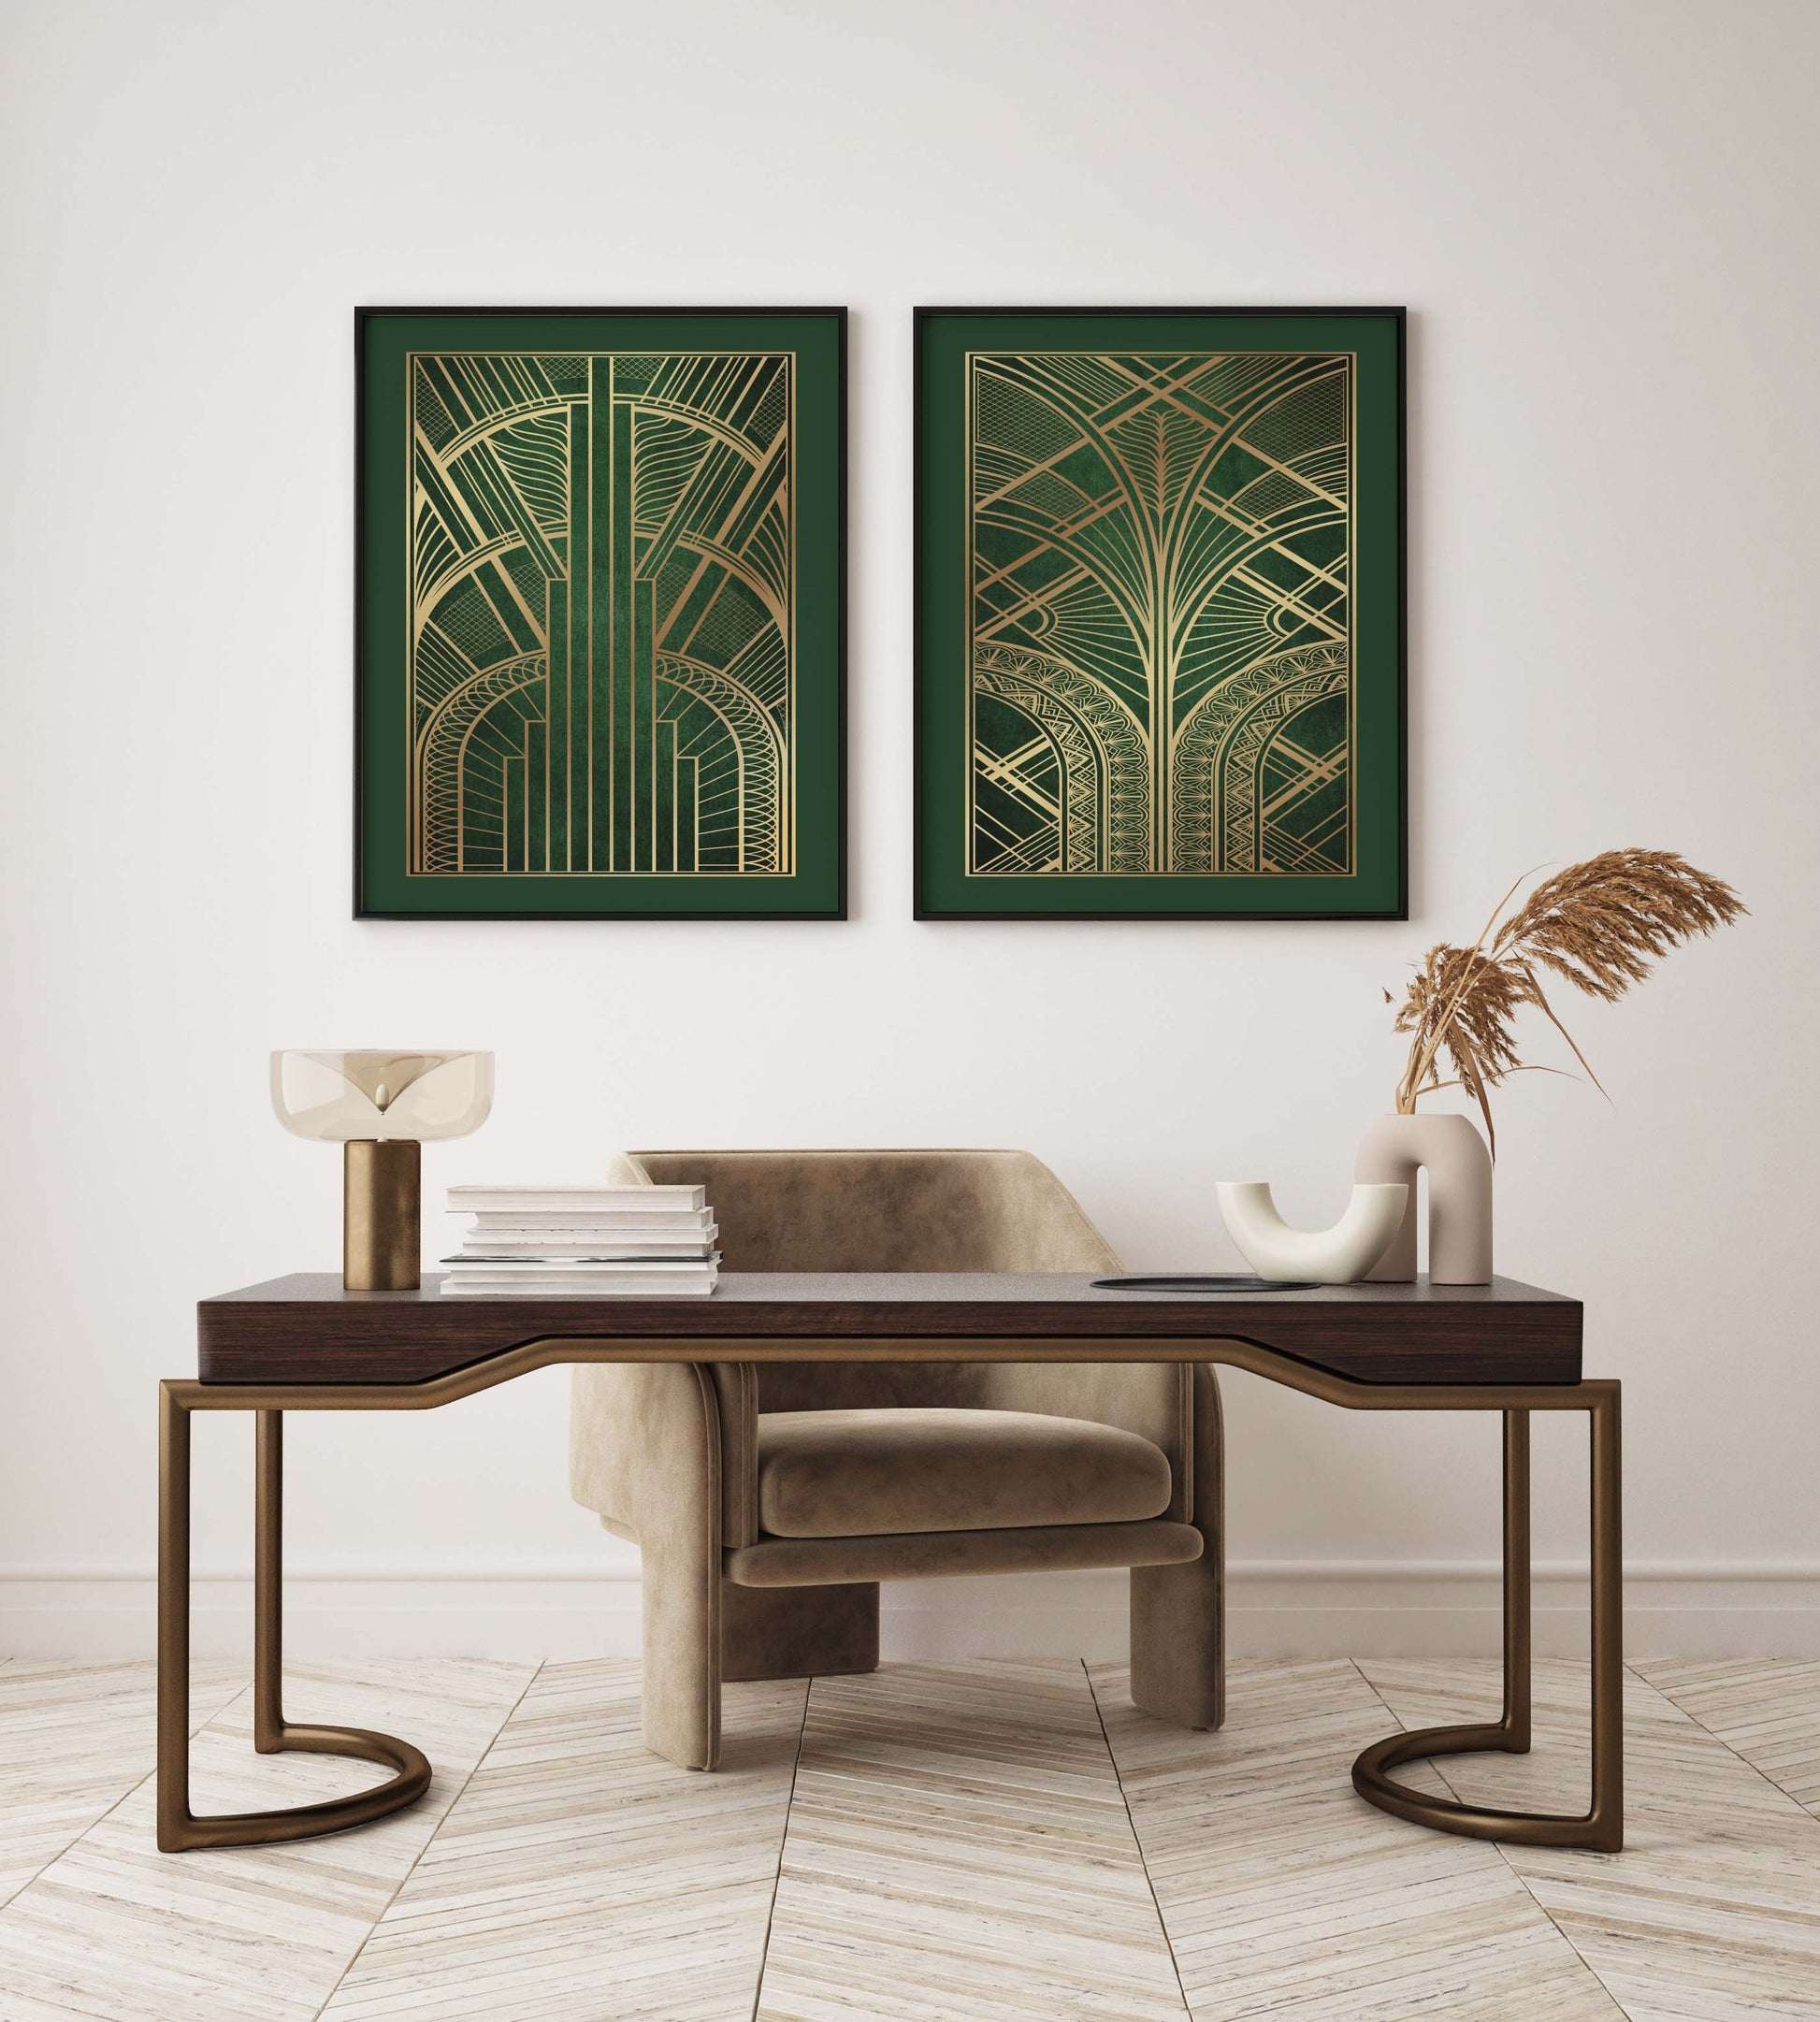 Set of art deco prints in green and gold with geometric patterns